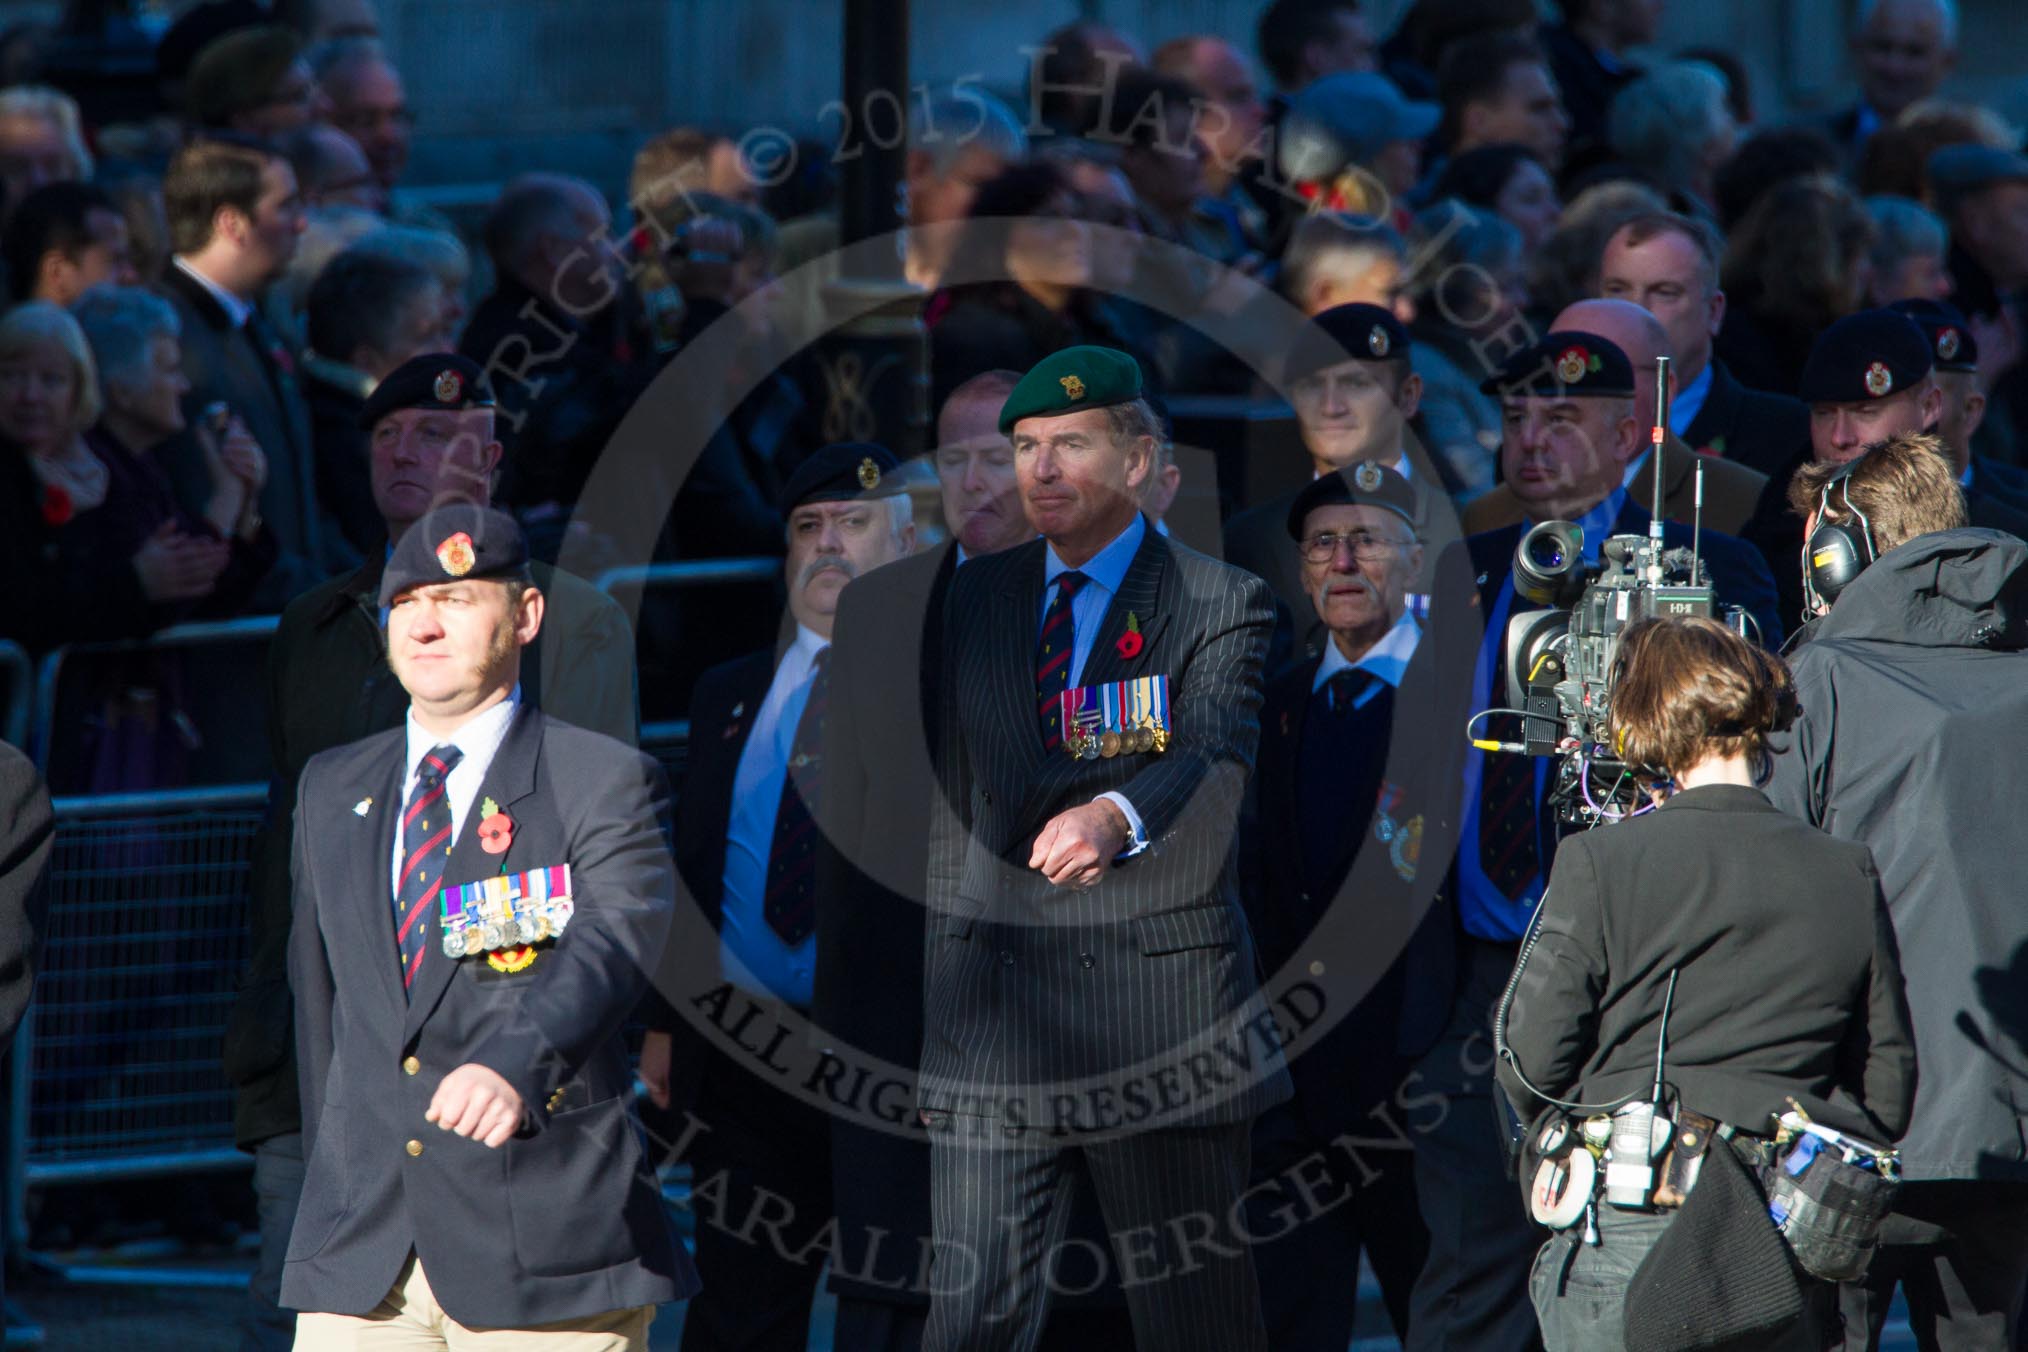 Remembrance Sunday Cenotaph March Past 2013: B21 - Royal Engineers Bomb Disposal Association..
Press stand opposite the Foreign Office building, Whitehall, London SW1,
London,
Greater London,
United Kingdom,
on 10 November 2013 at 12:02, image #1467